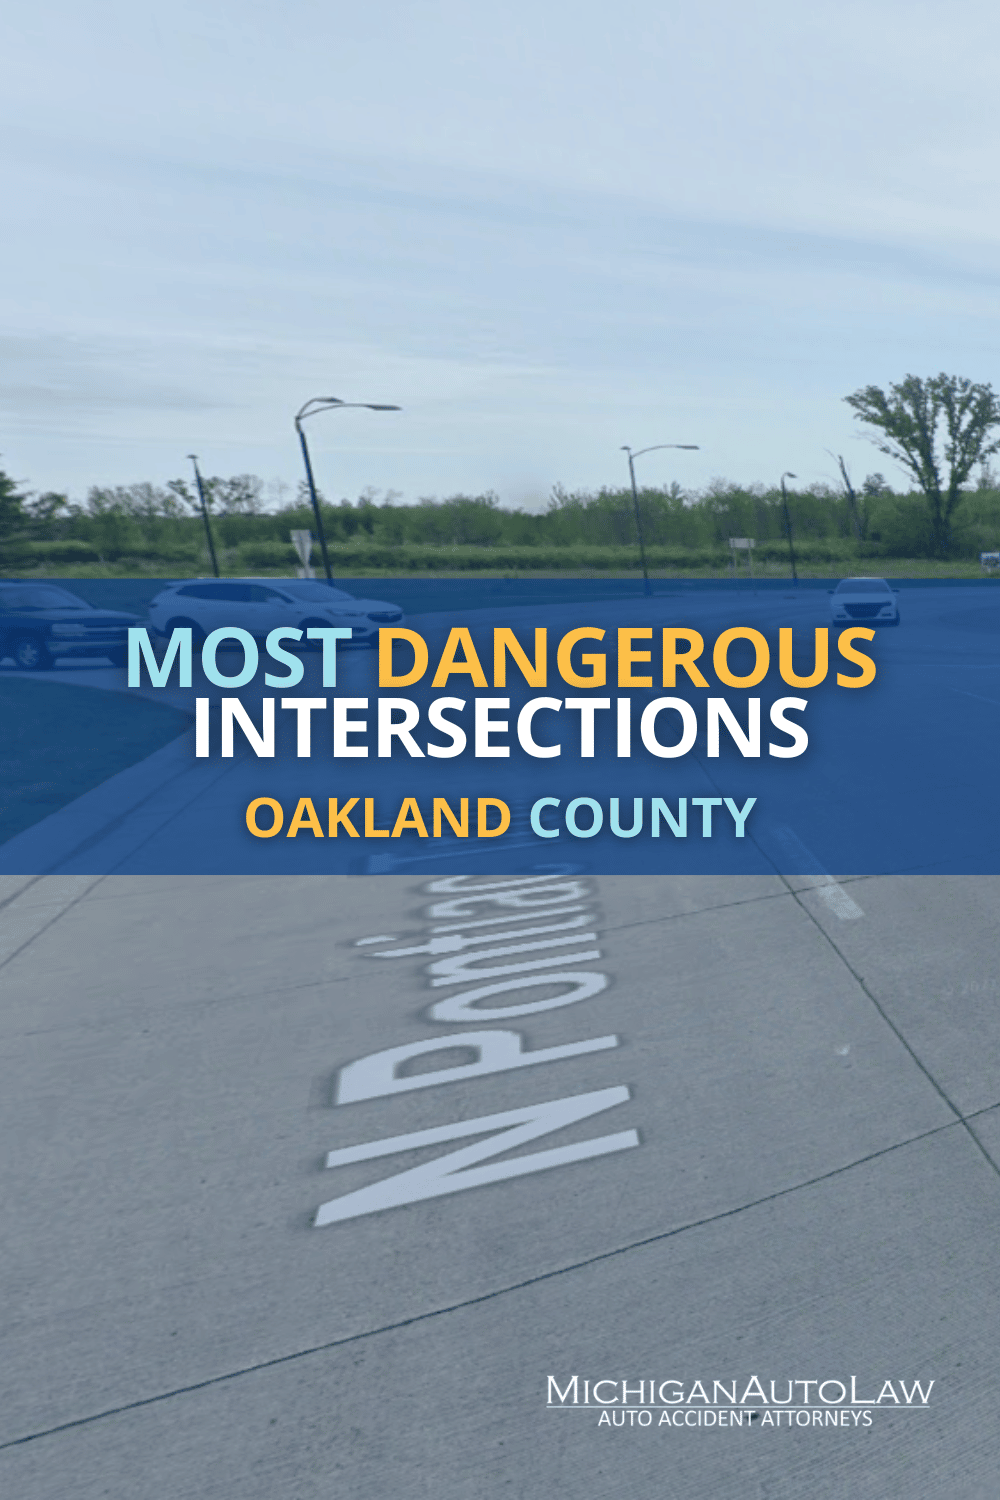 Oakland County’s Most Dangerous Intersections in 2021